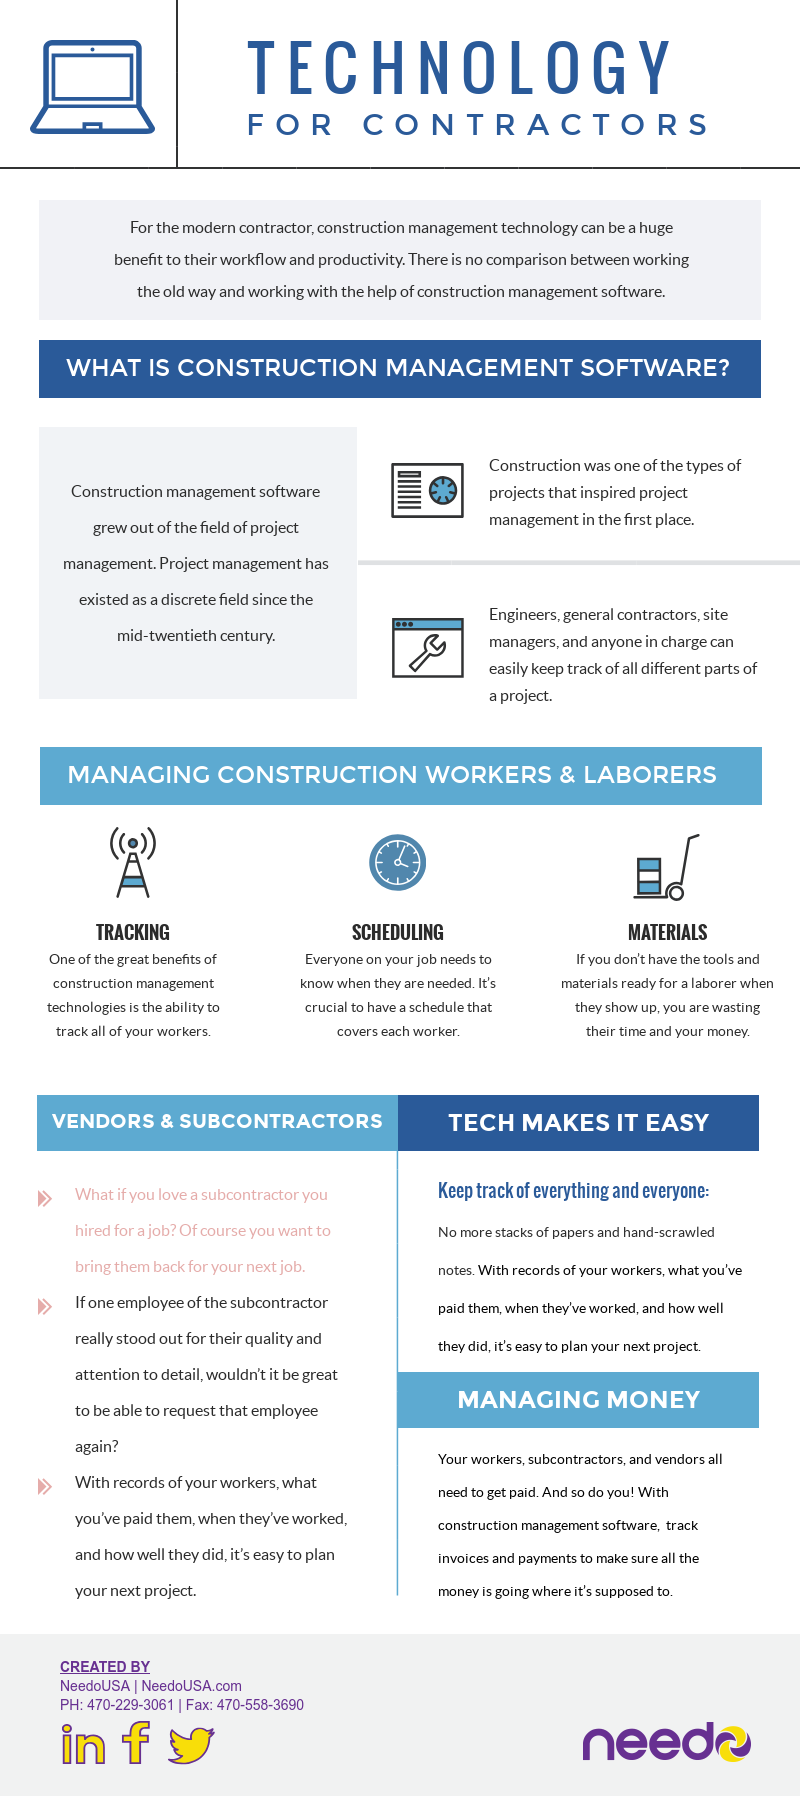 Technology for Contractors [infographic]